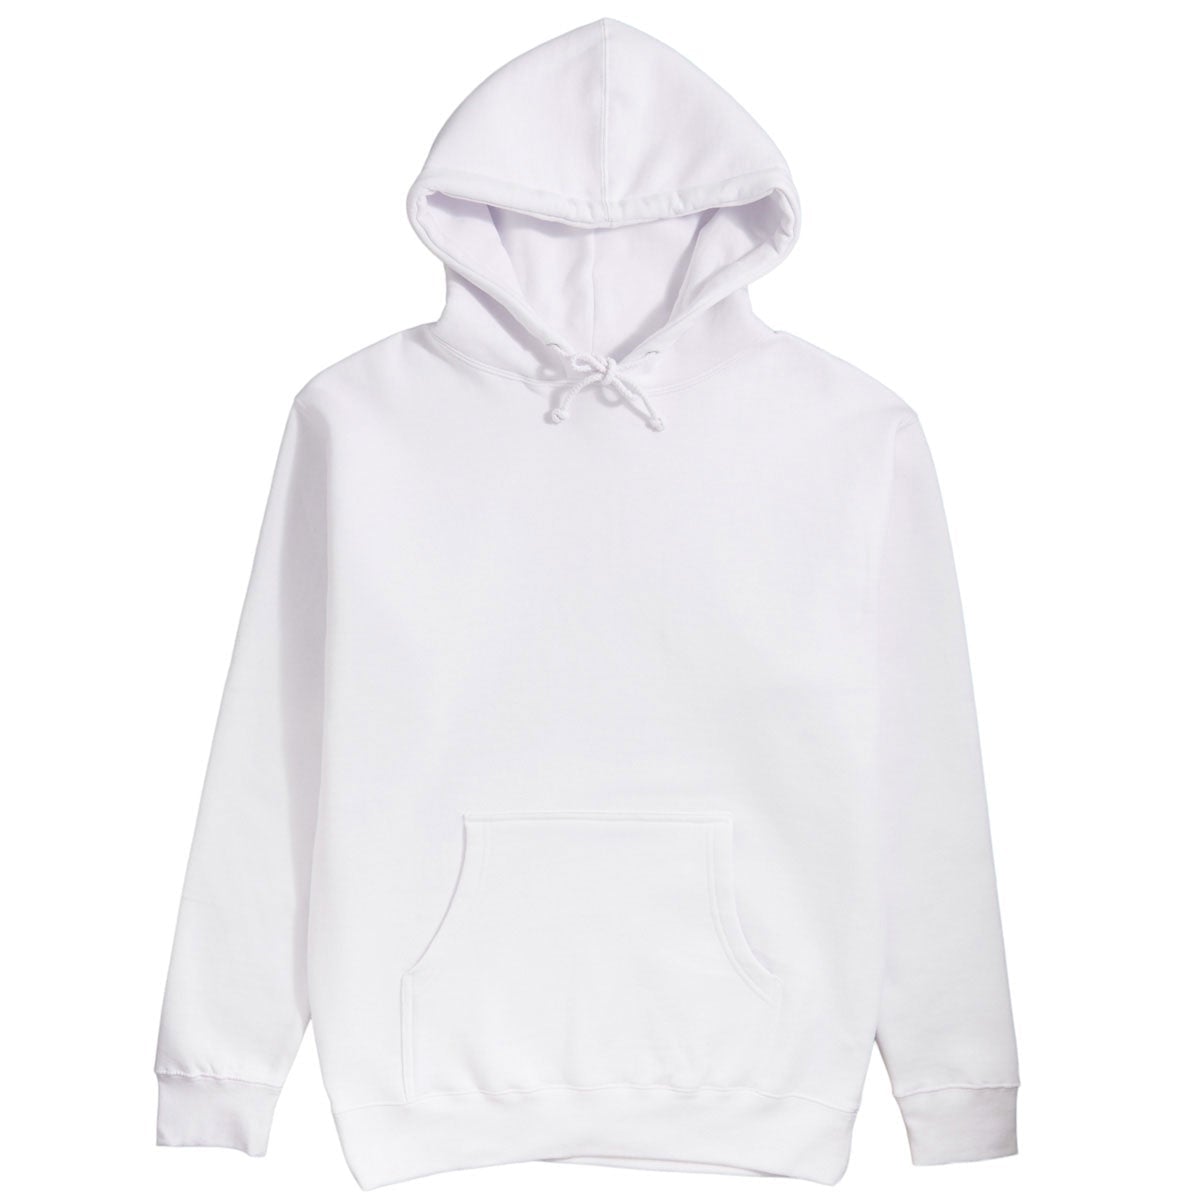 Keith Shore Color-Up Customs X Pullover Hoodie image 2